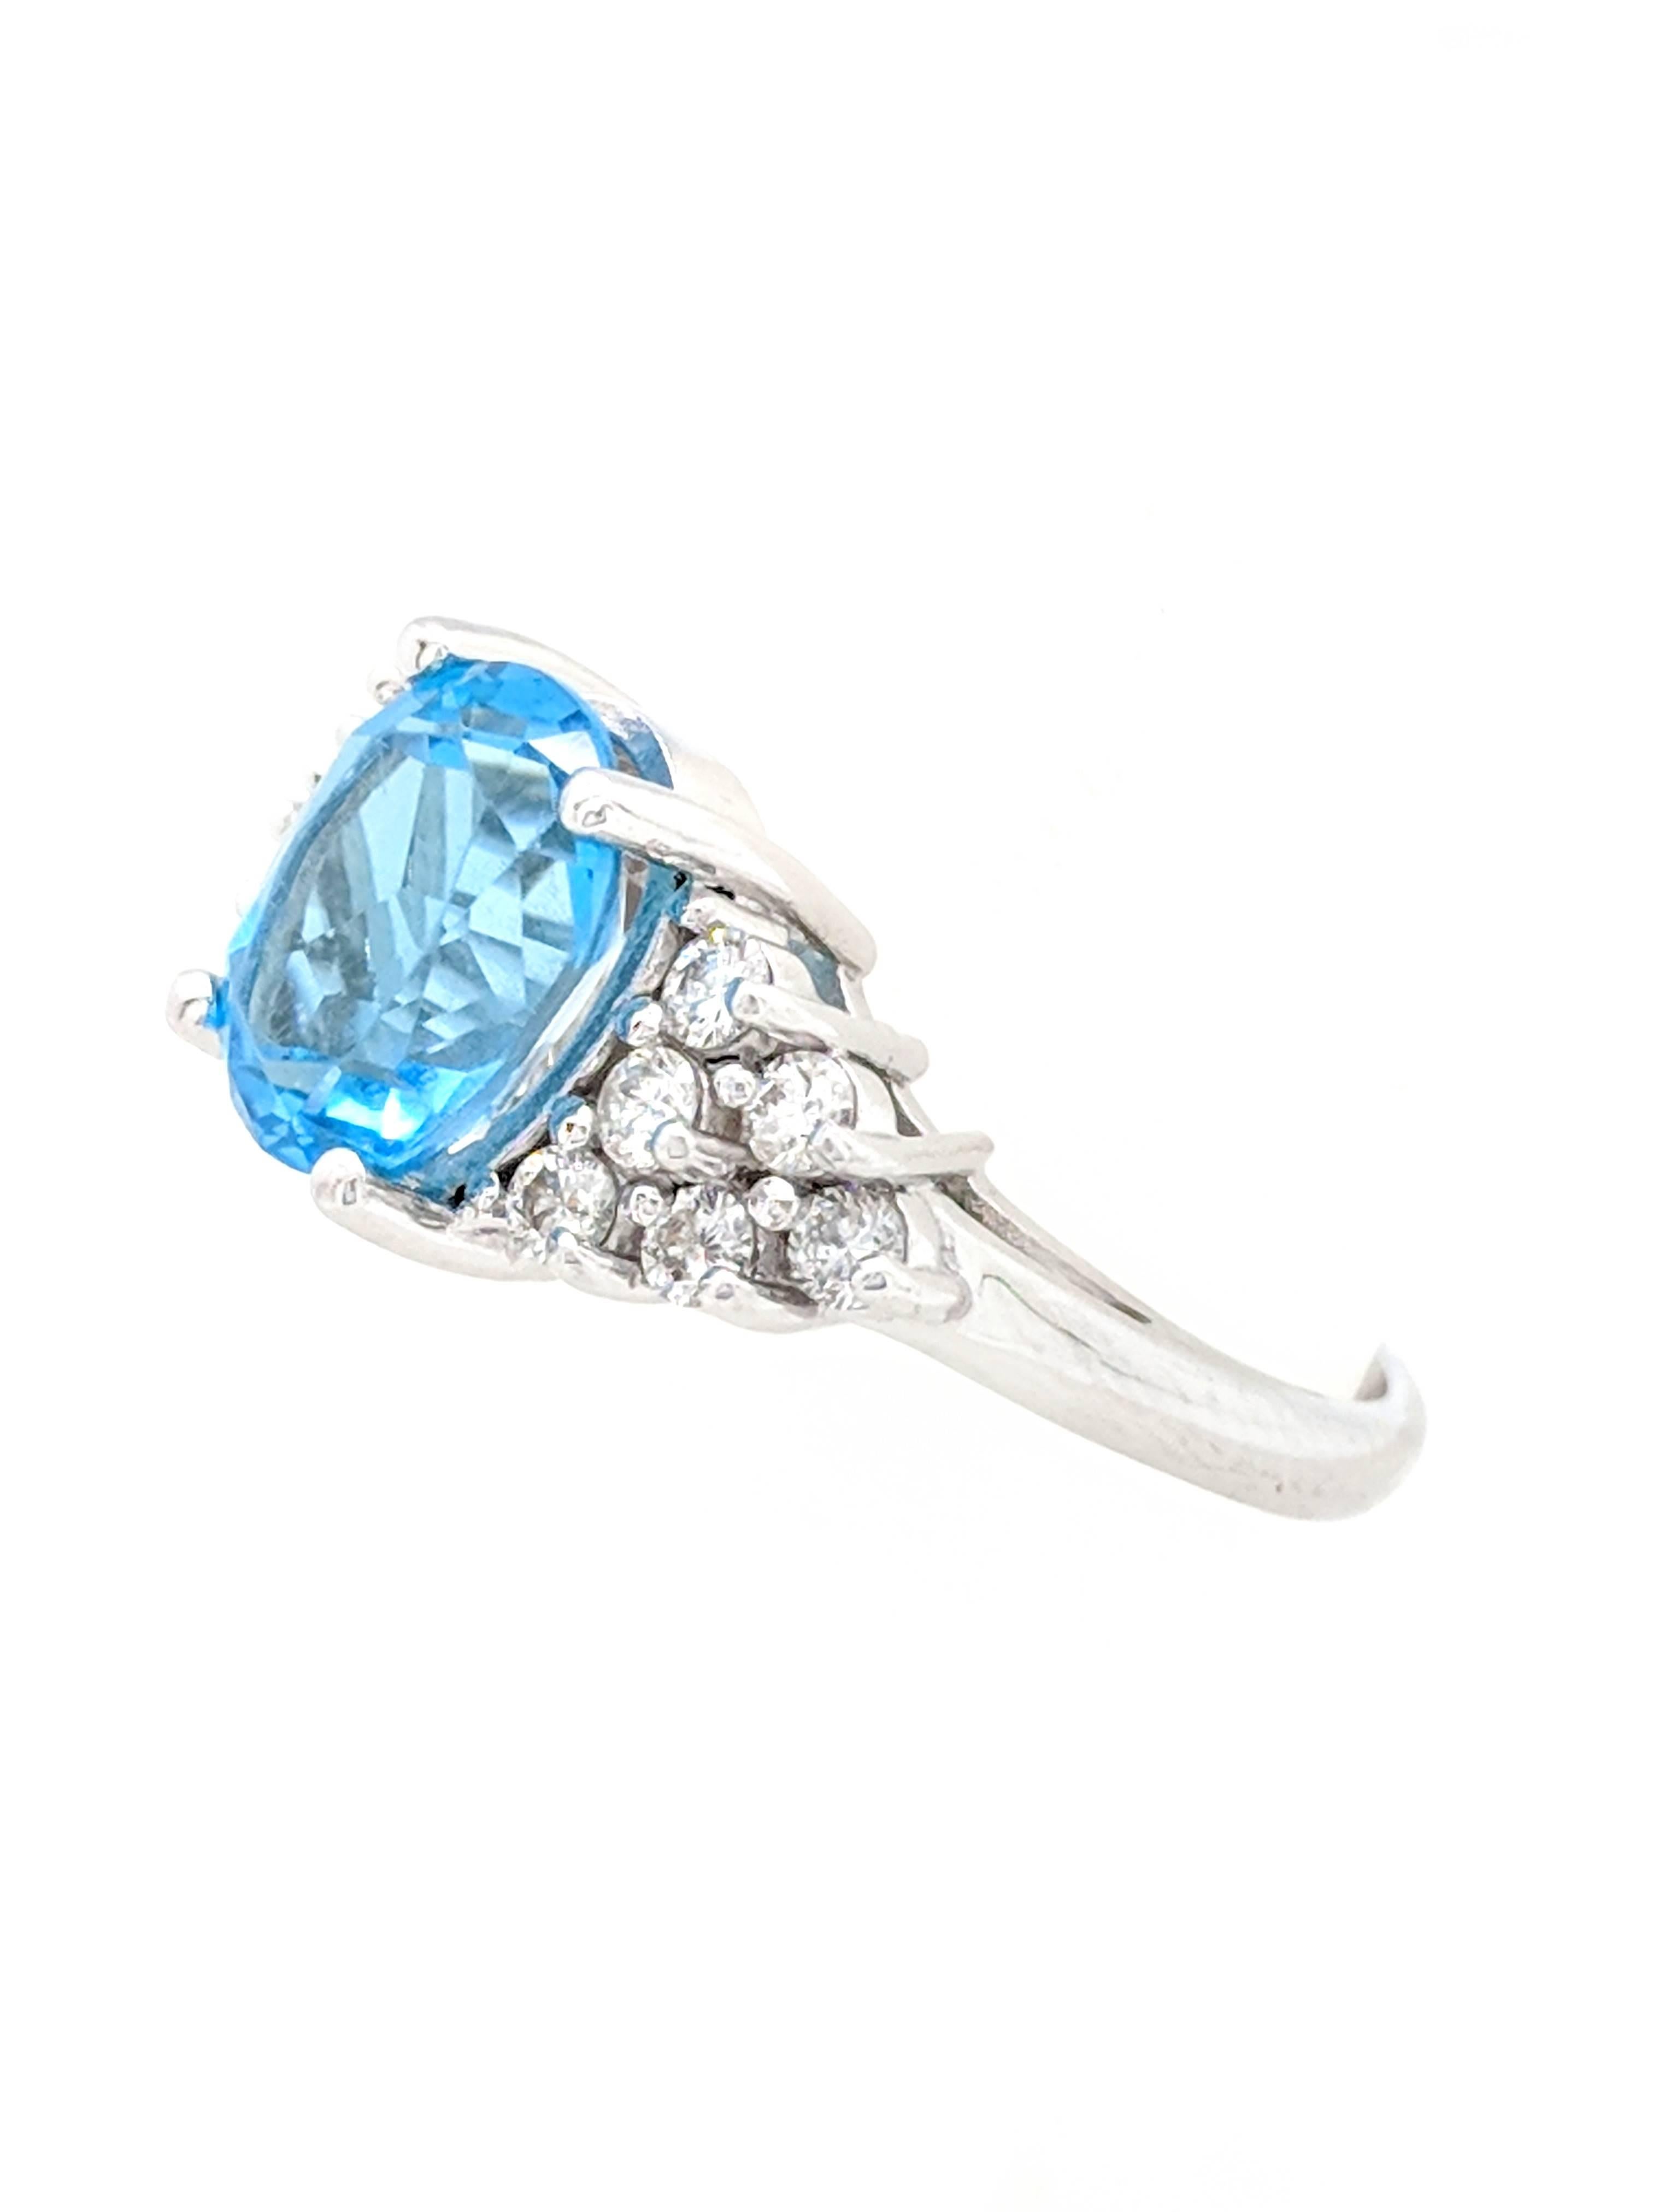 14 Karat White Gold 3.50 Carat Blue Topaz and Diamond Cocktail Ring In Excellent Condition For Sale In Gainesville, FL